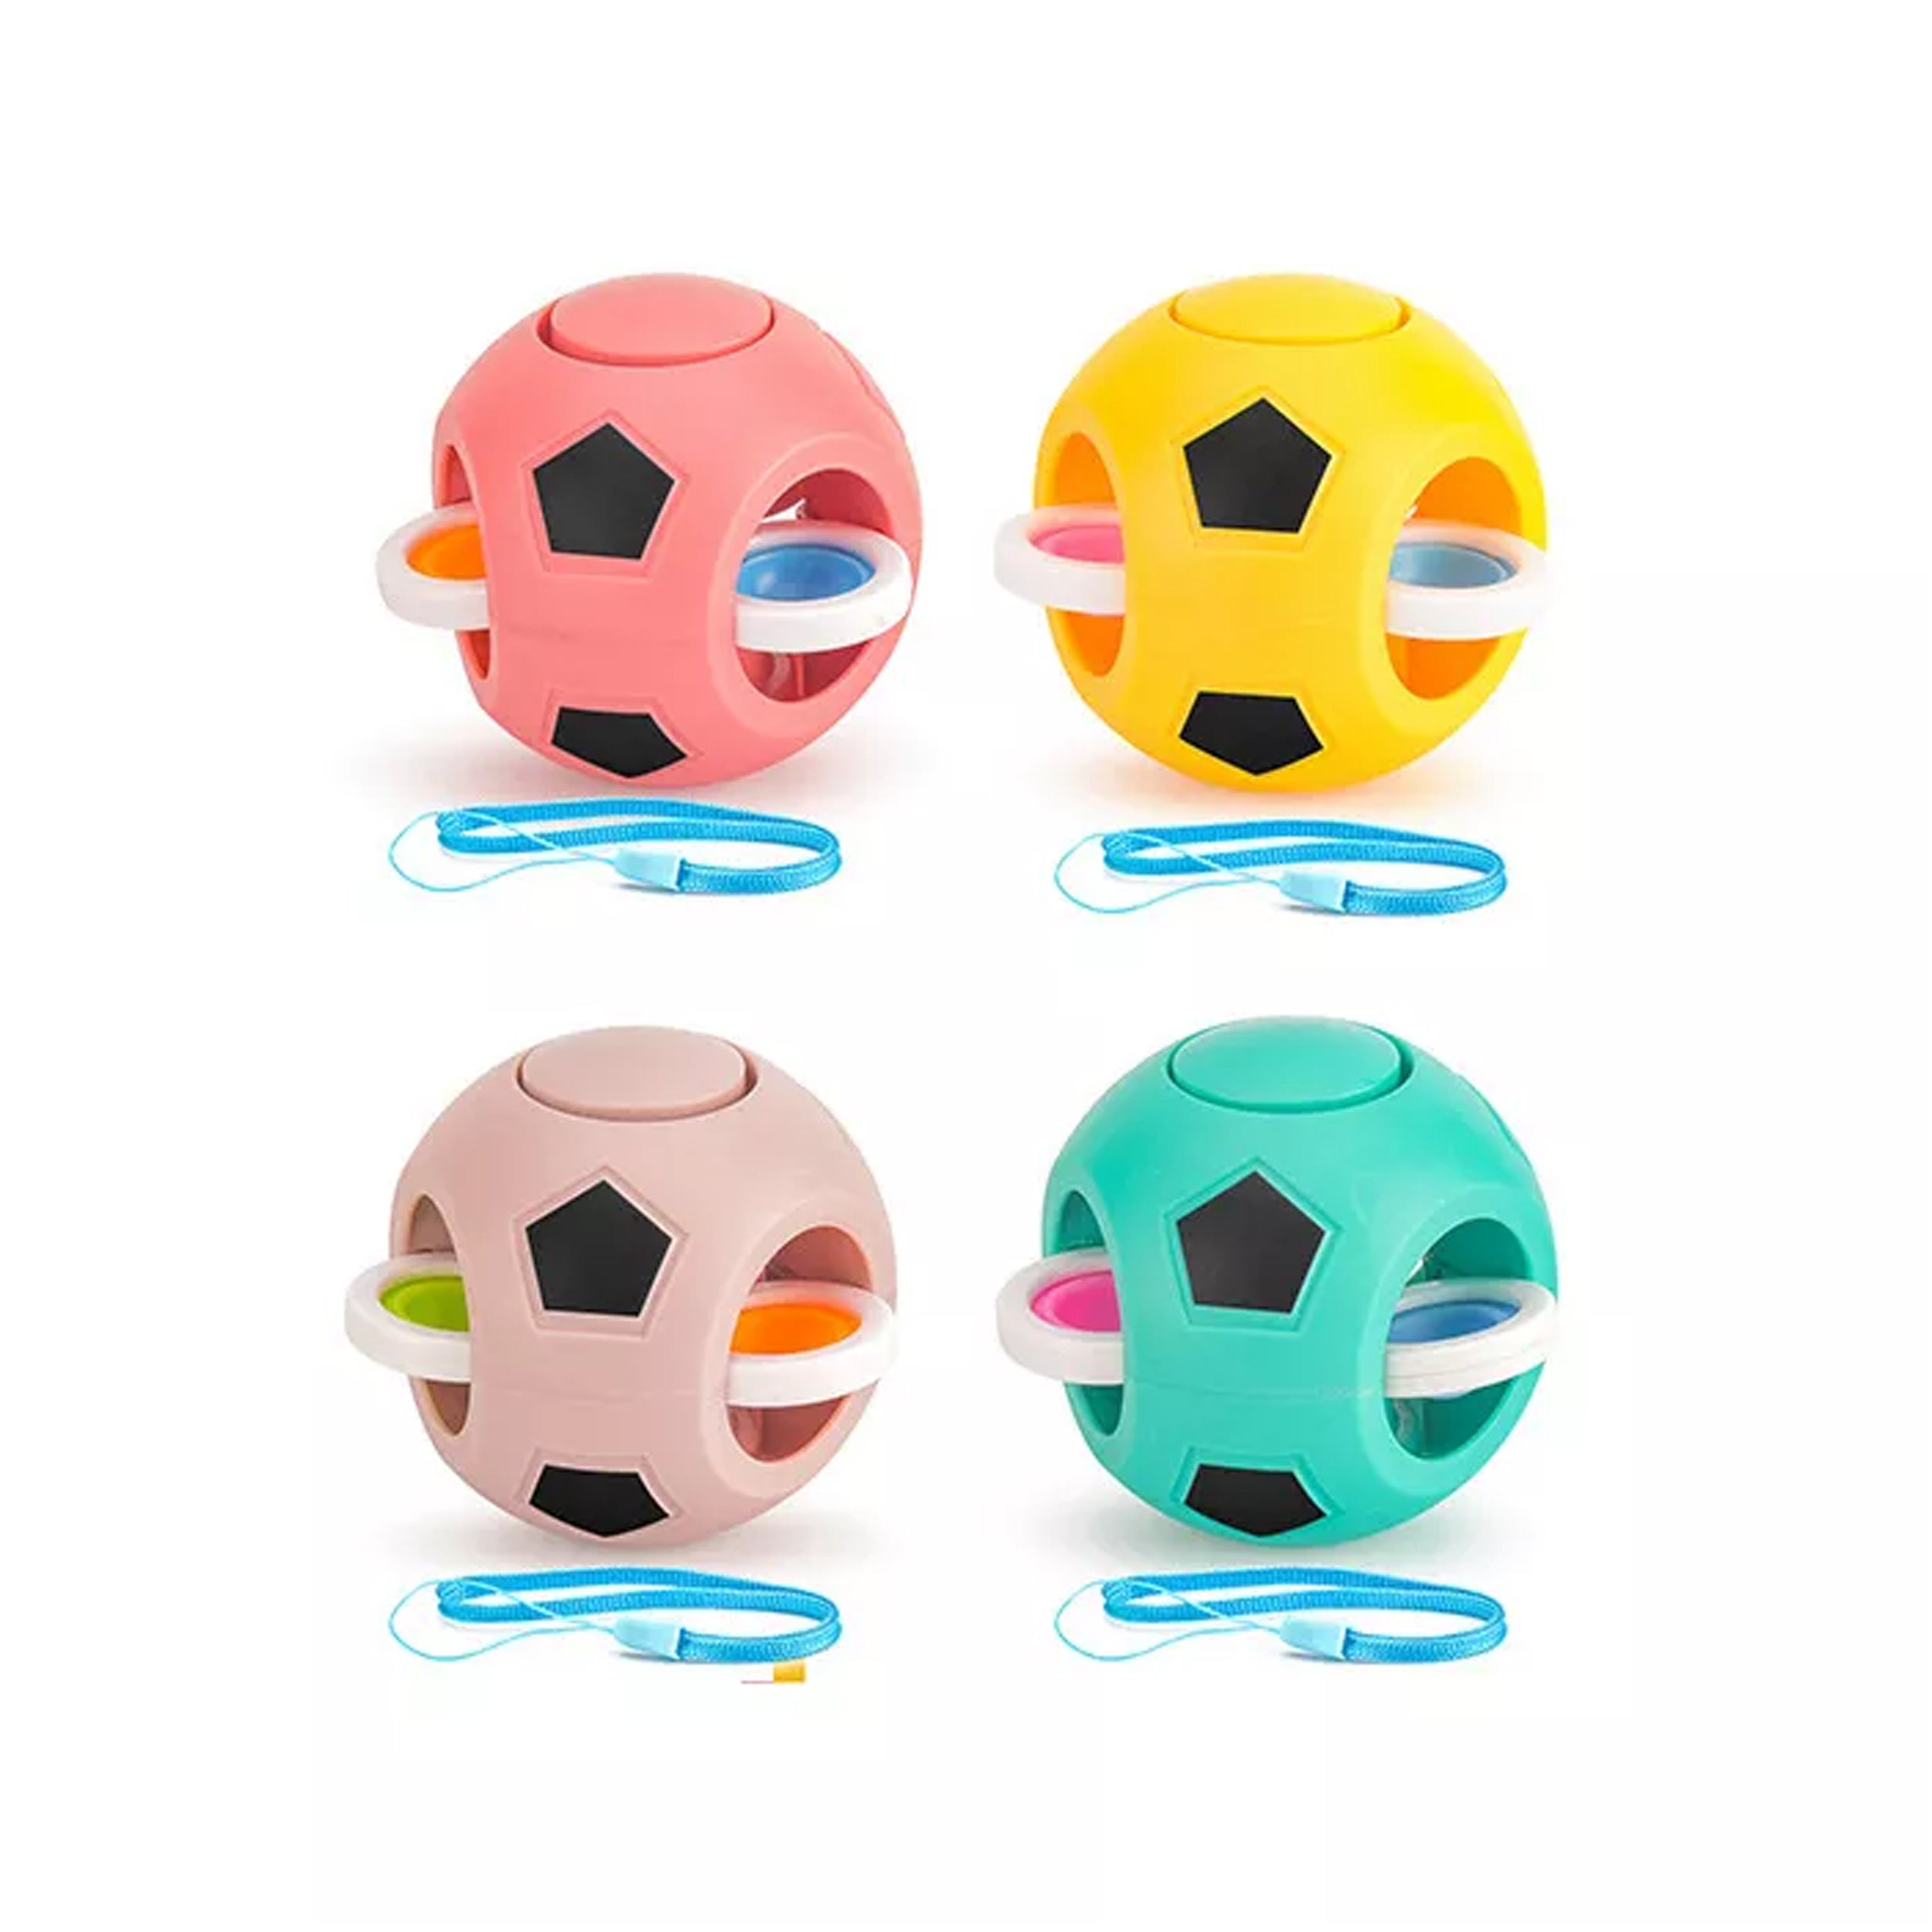 Magic Sensory Football Bubble Gyro Fidget Toy for Stress Relief and Focus